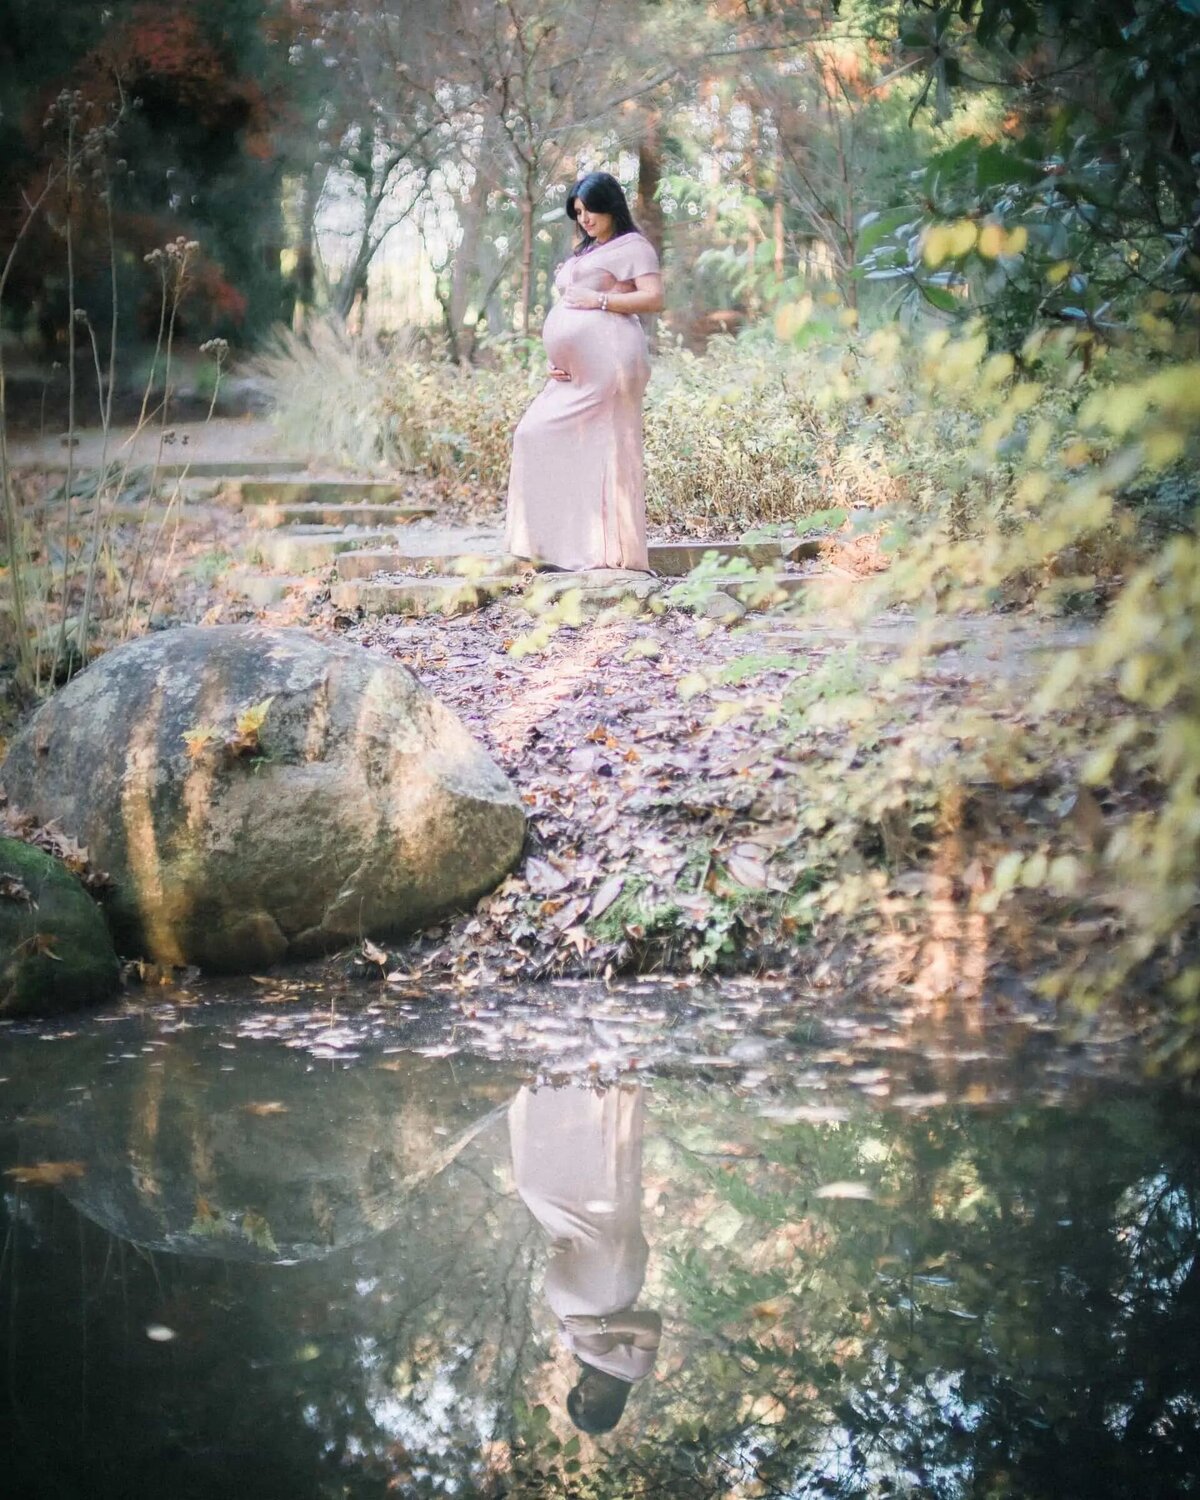 The reflection of a pregnant woman in a small pond.